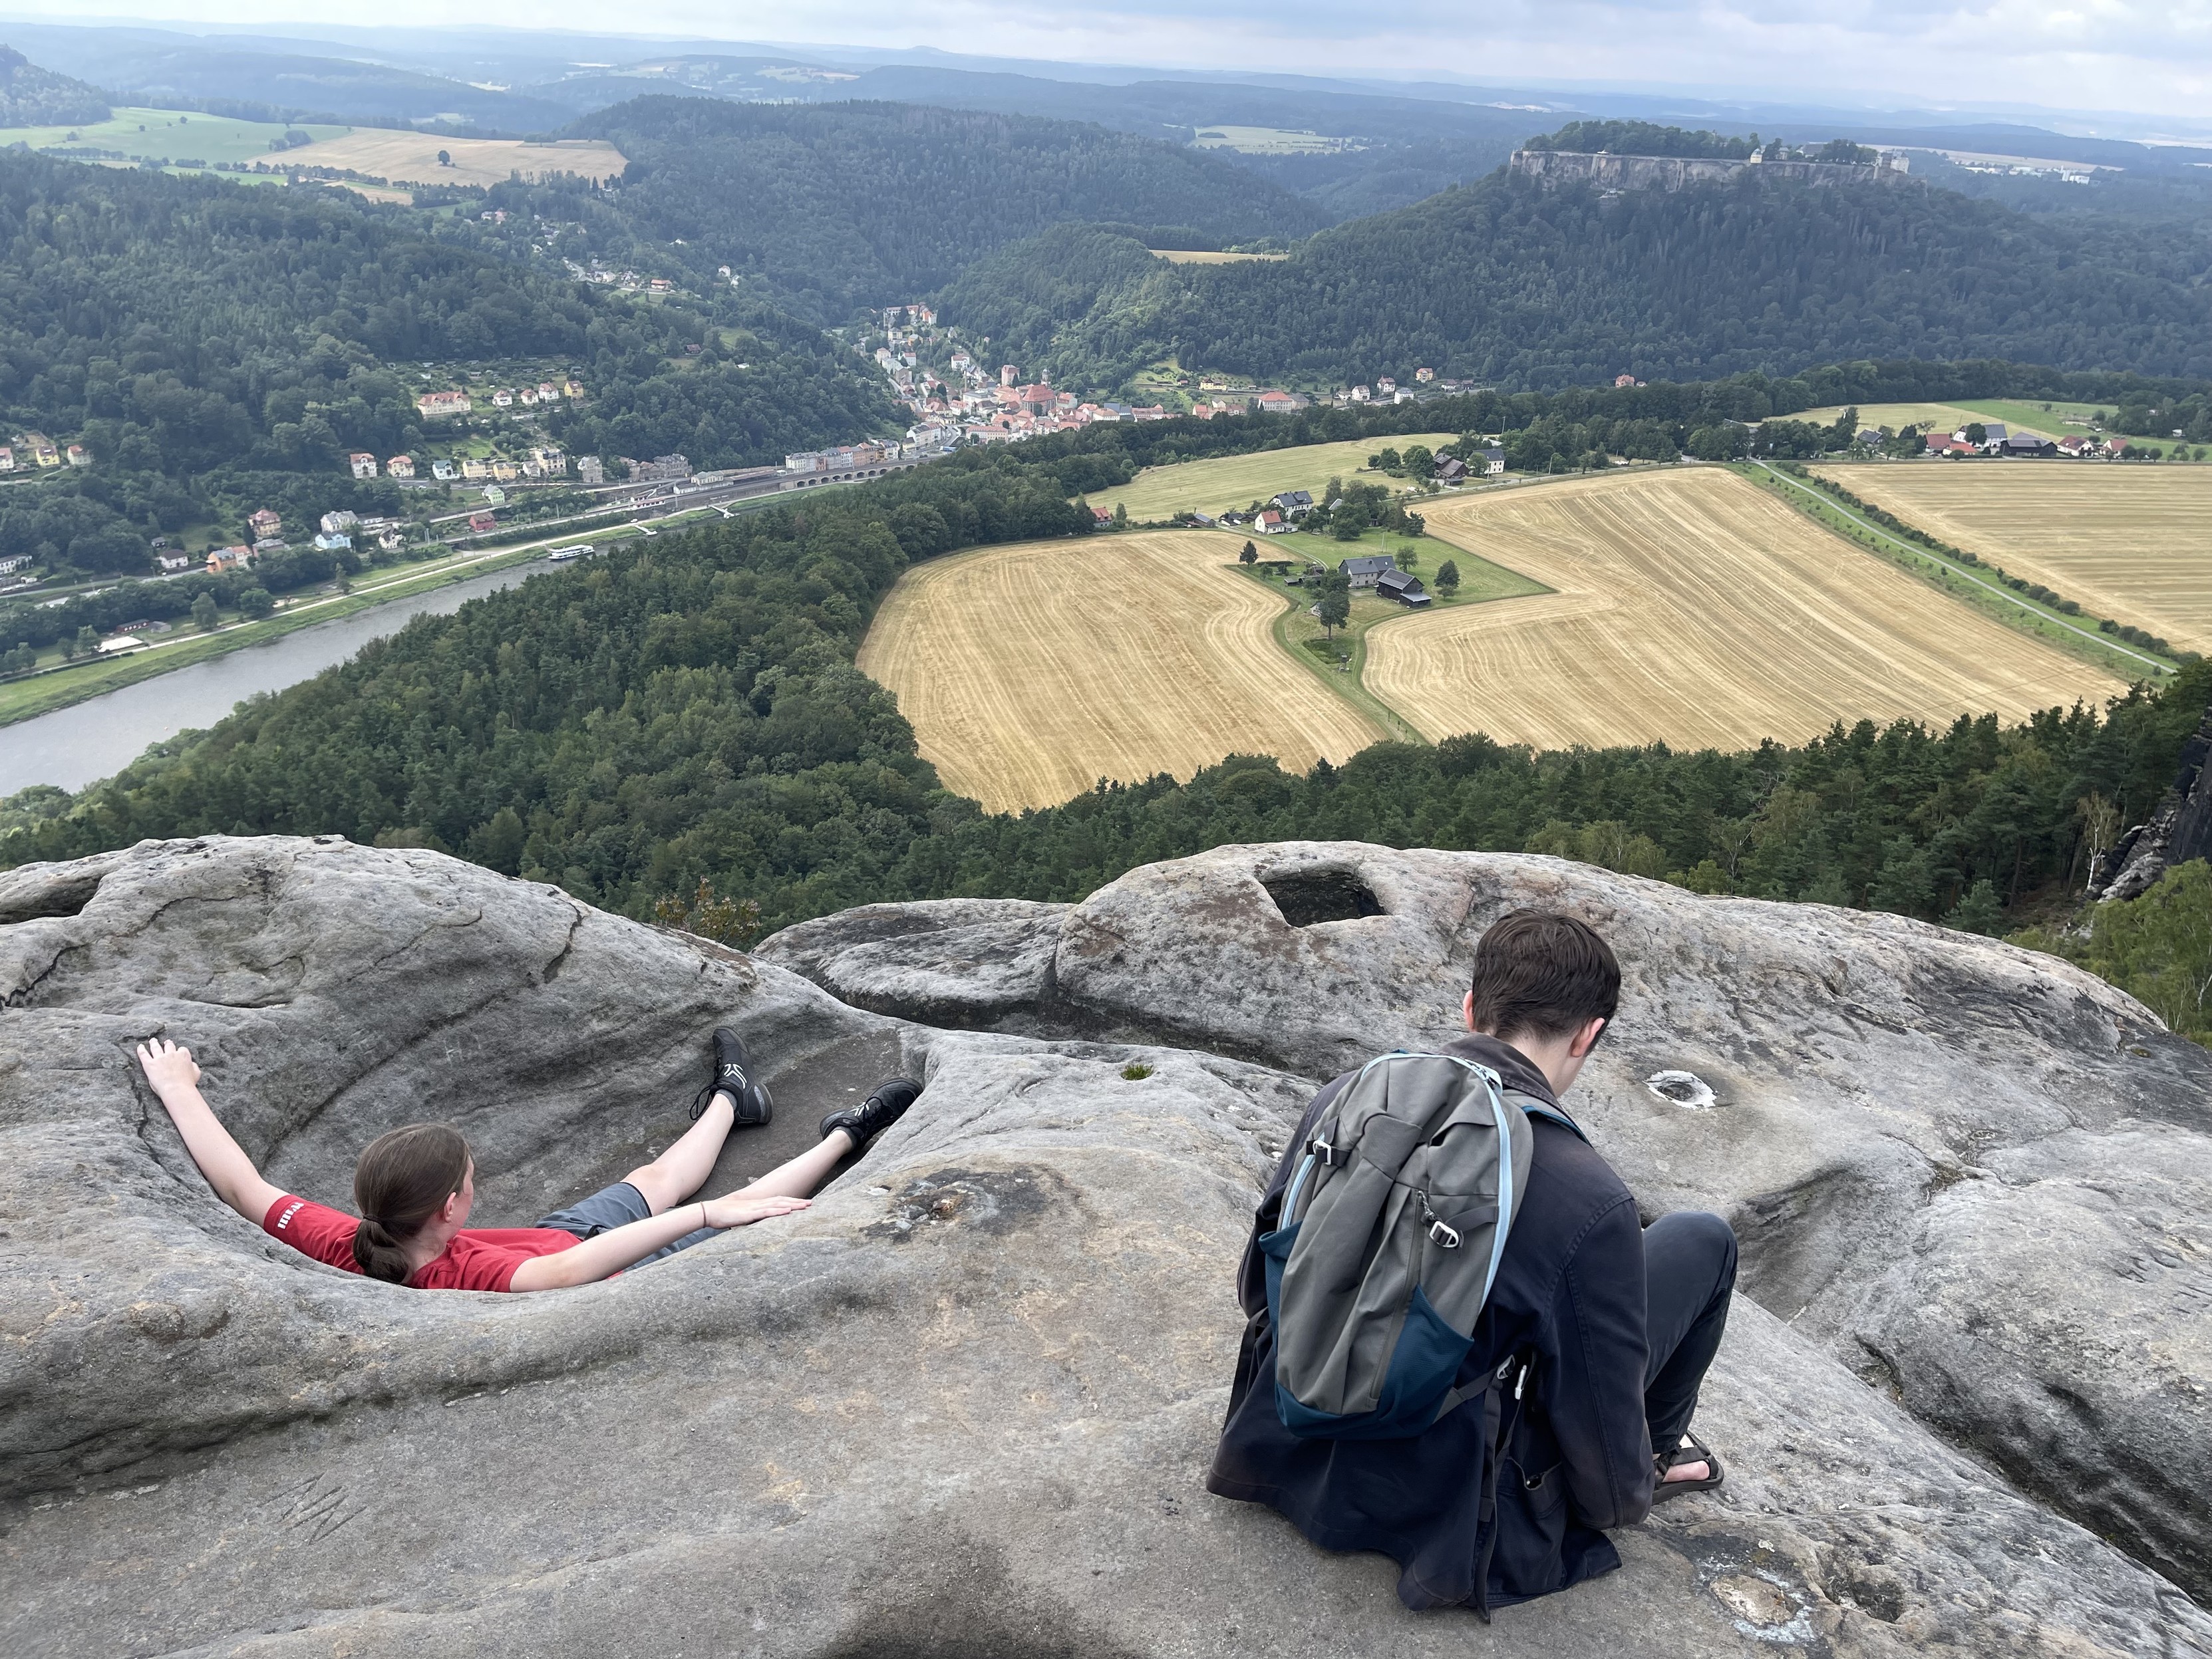 Two people on a rocky cliff overlooking a scenic landscape with fields, forests, a river, and distant hills. One person is lying down, while the other sits with a backpack.